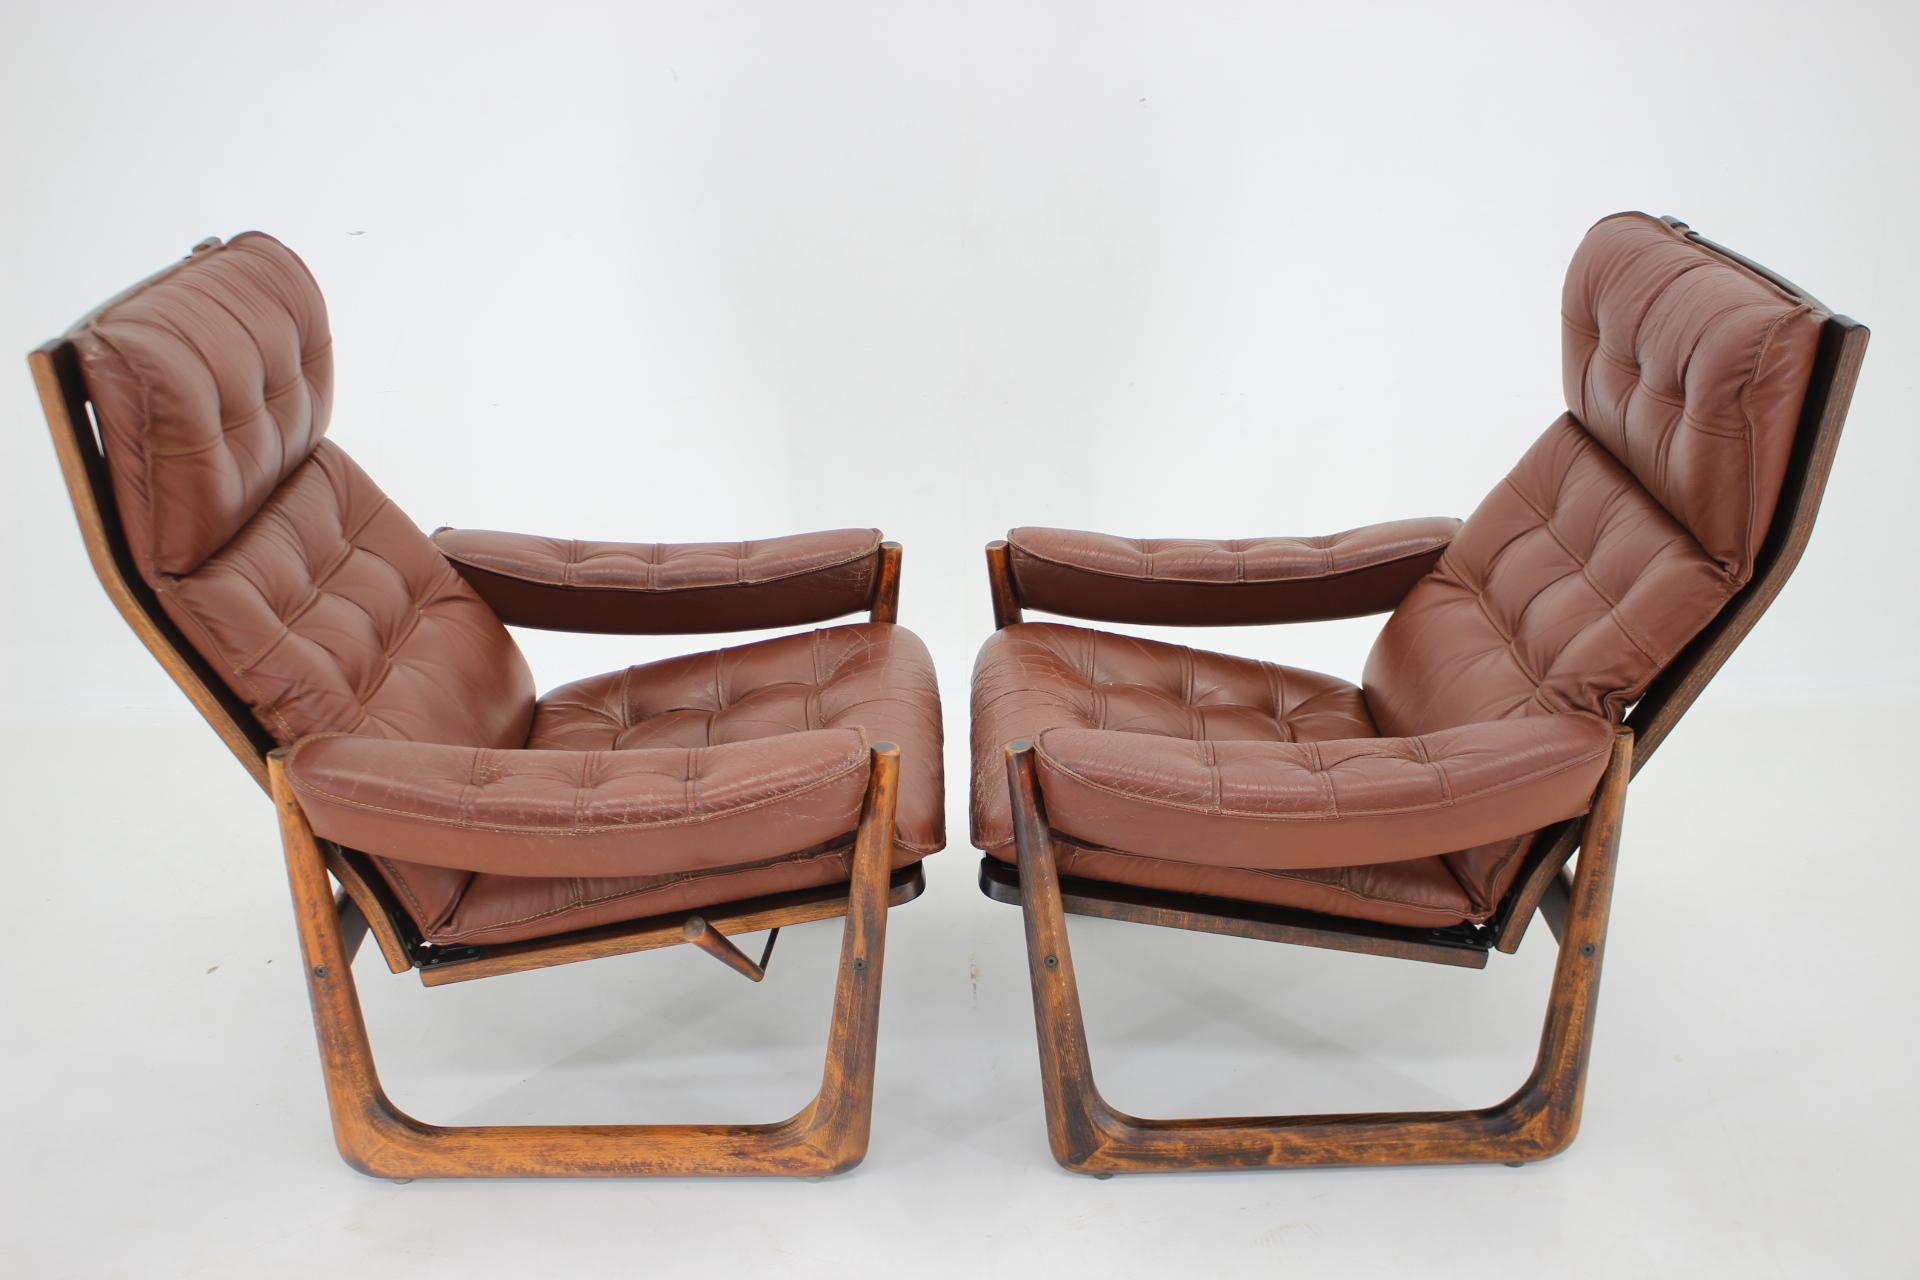 Danish 1960s Pair of Leather Adjustable Armchairs by Genega Mobler, Denmark